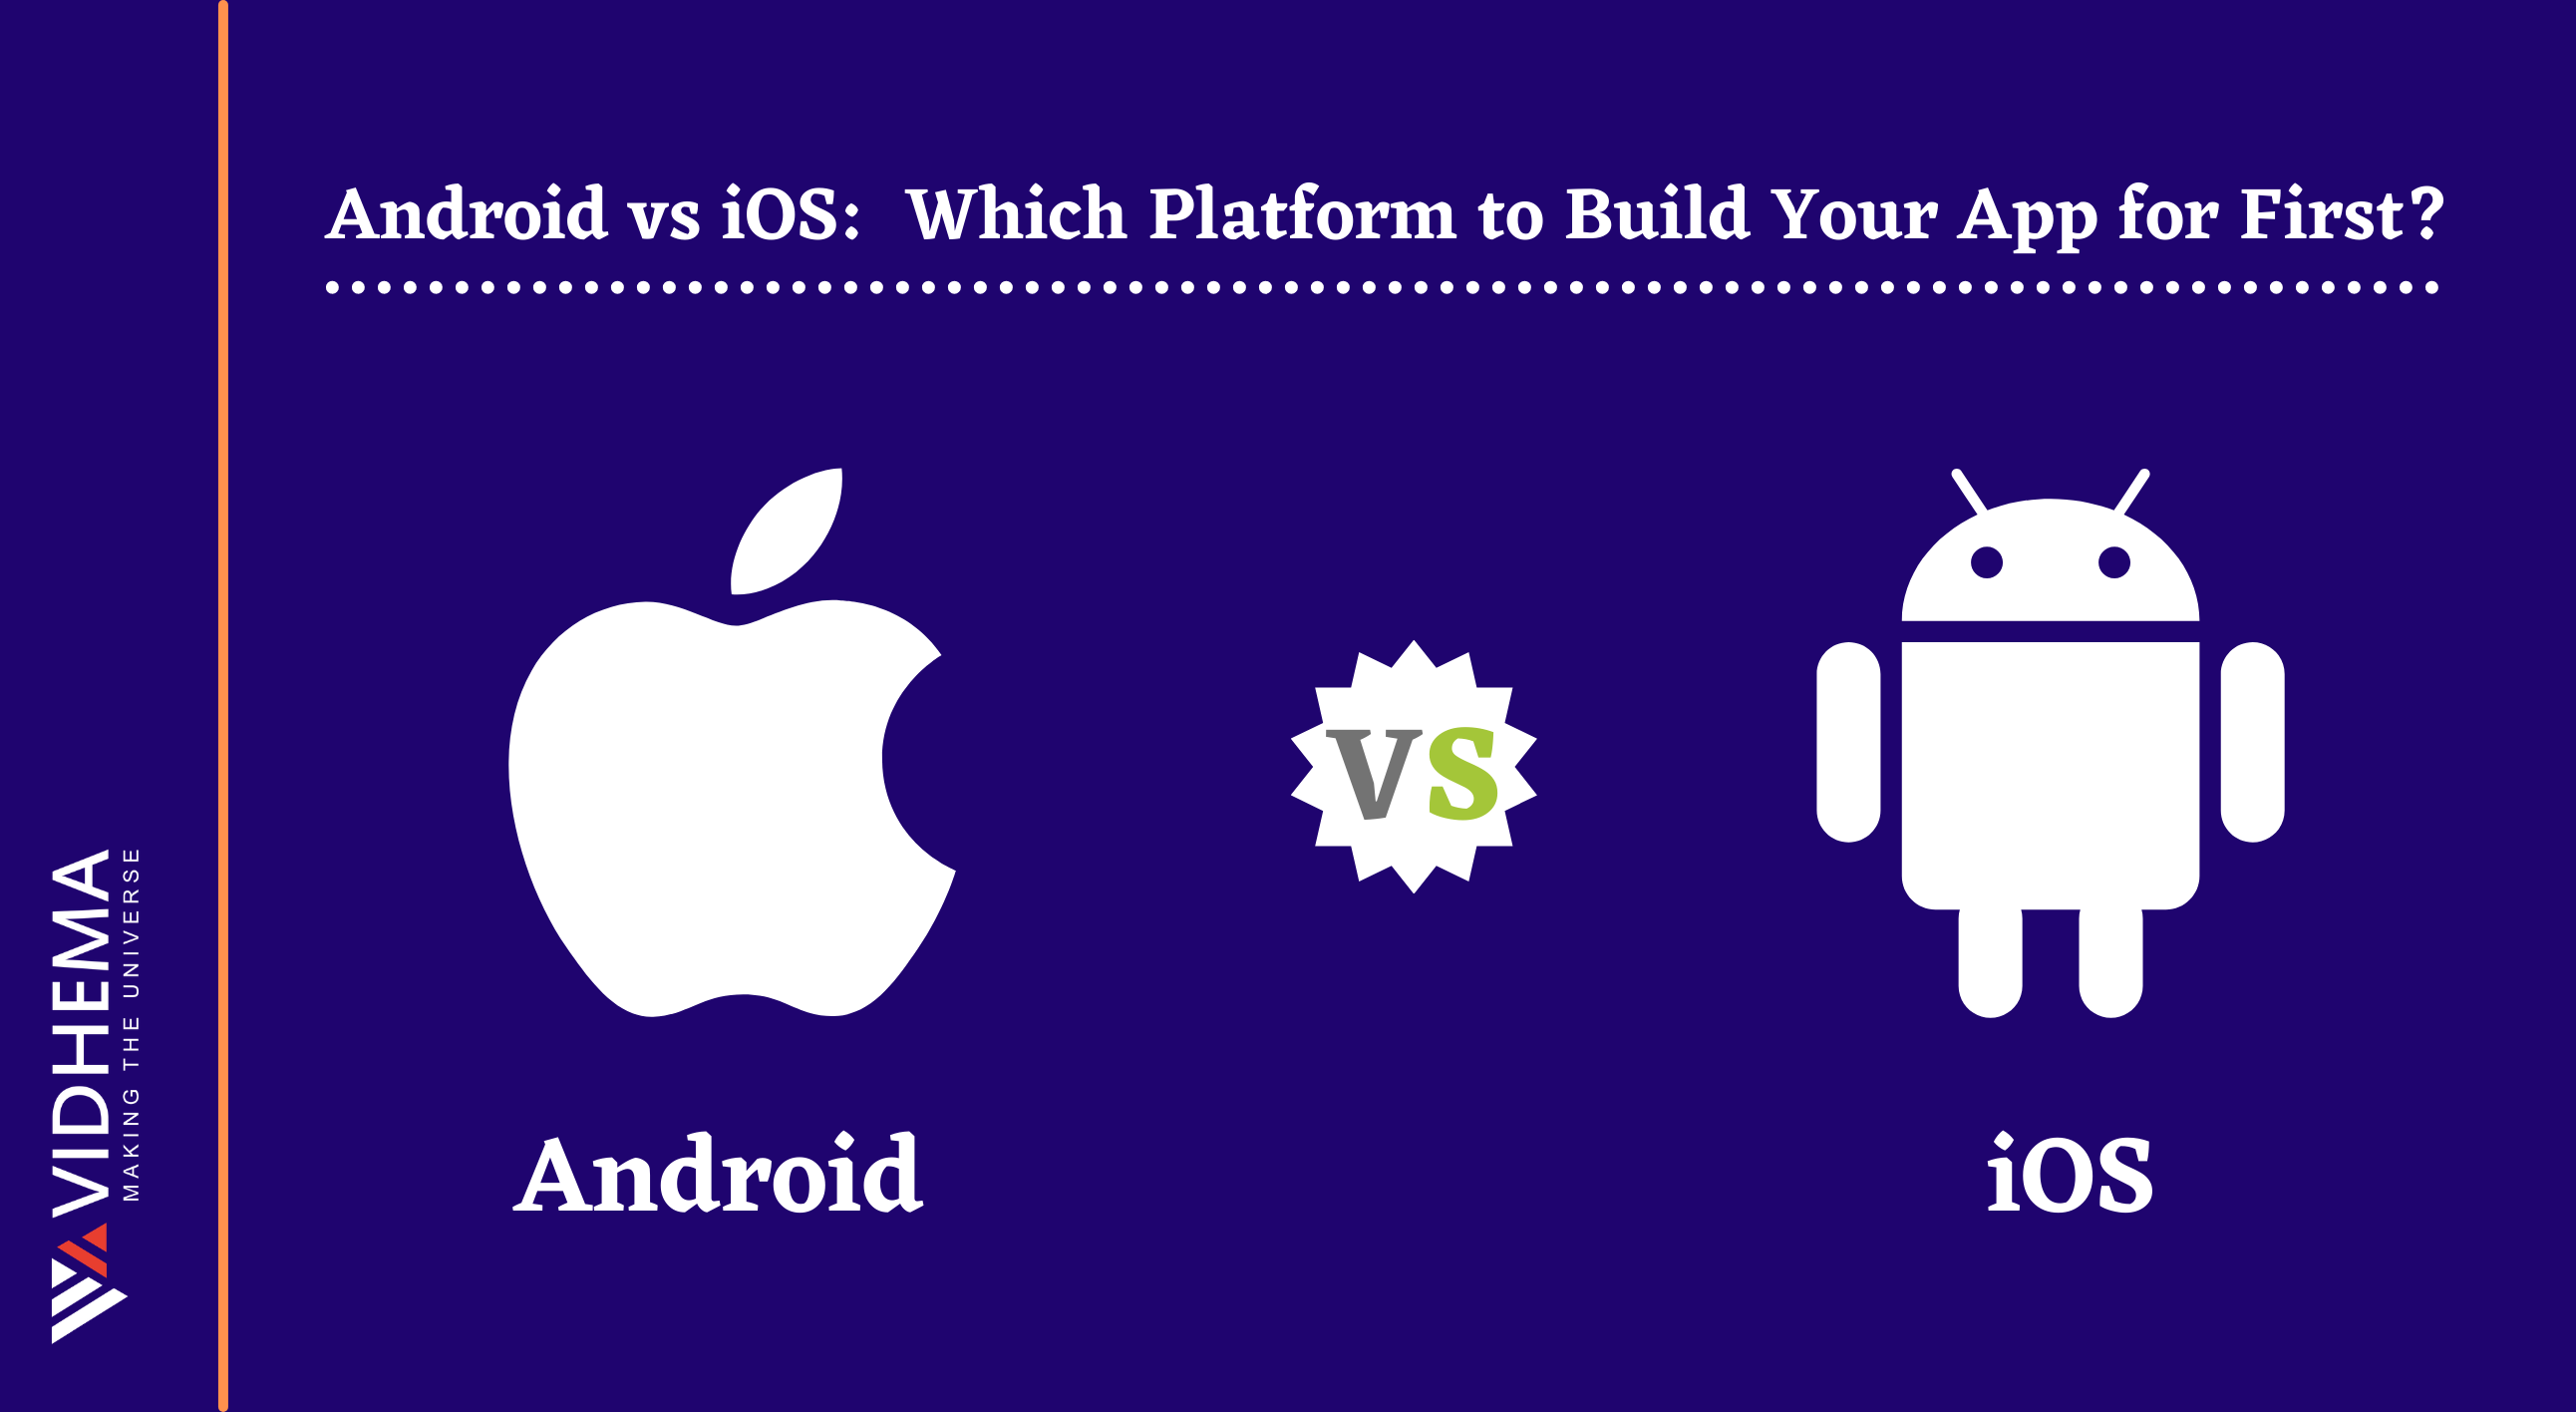 Android vs iOS: Which Platform to Build Your App for First?